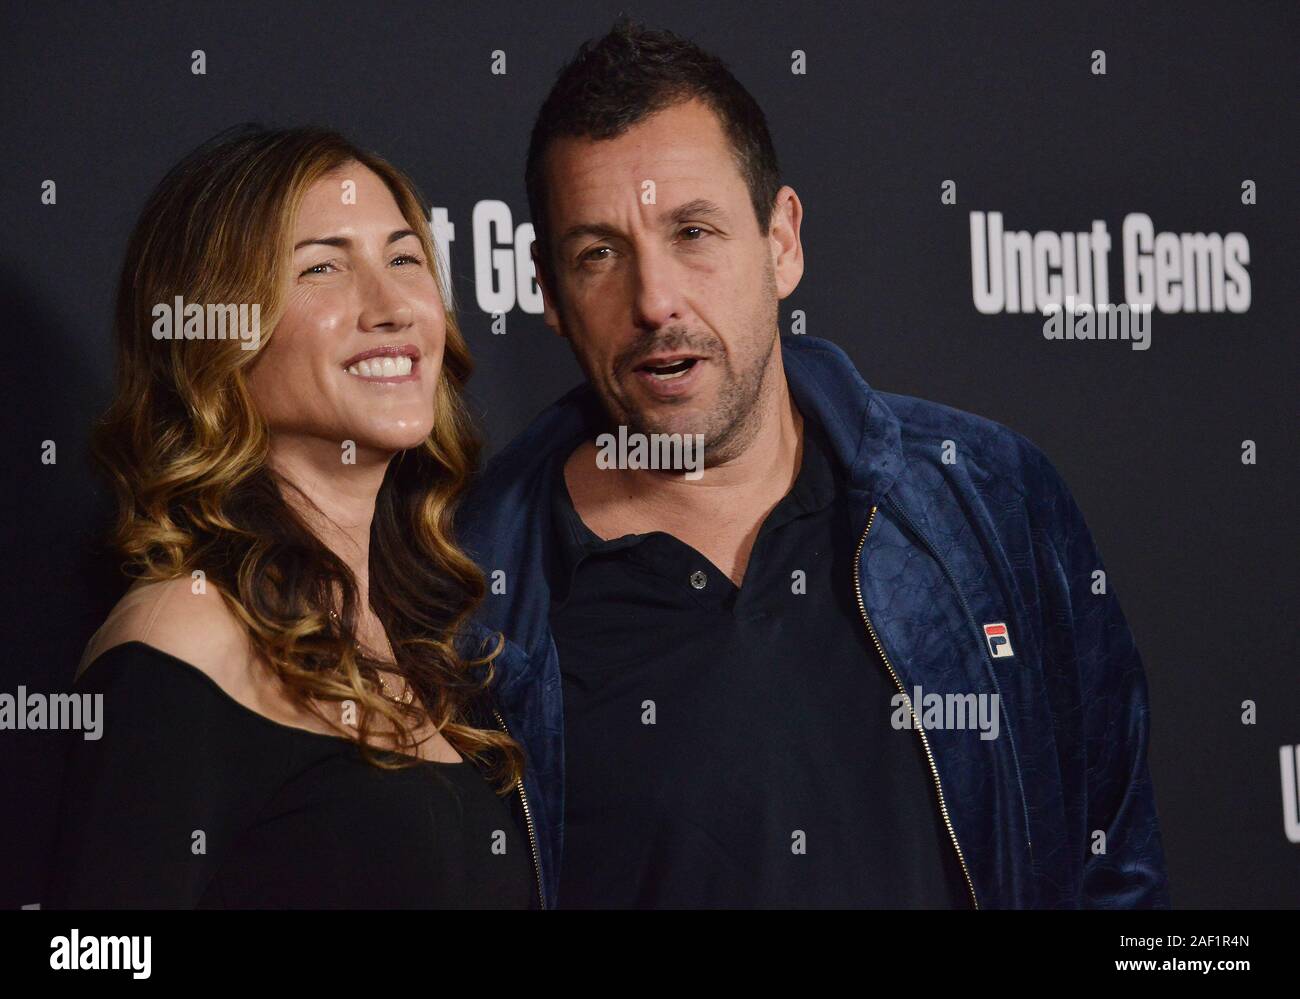 Los Angeles, USA. 11th Dec, 2019. Jackie Sandler and Adam Sandler arrives at the UNCUT GEMS Los Angeles Premiere held at the ArcLight Cinerama Dome in Los Angeles, CA on Wednesday, ?December 11, 2019. (Photo By Sthanlee B. Mirador/Sipa USA) Credit: Sipa USA/Alamy Live News Stock Photo